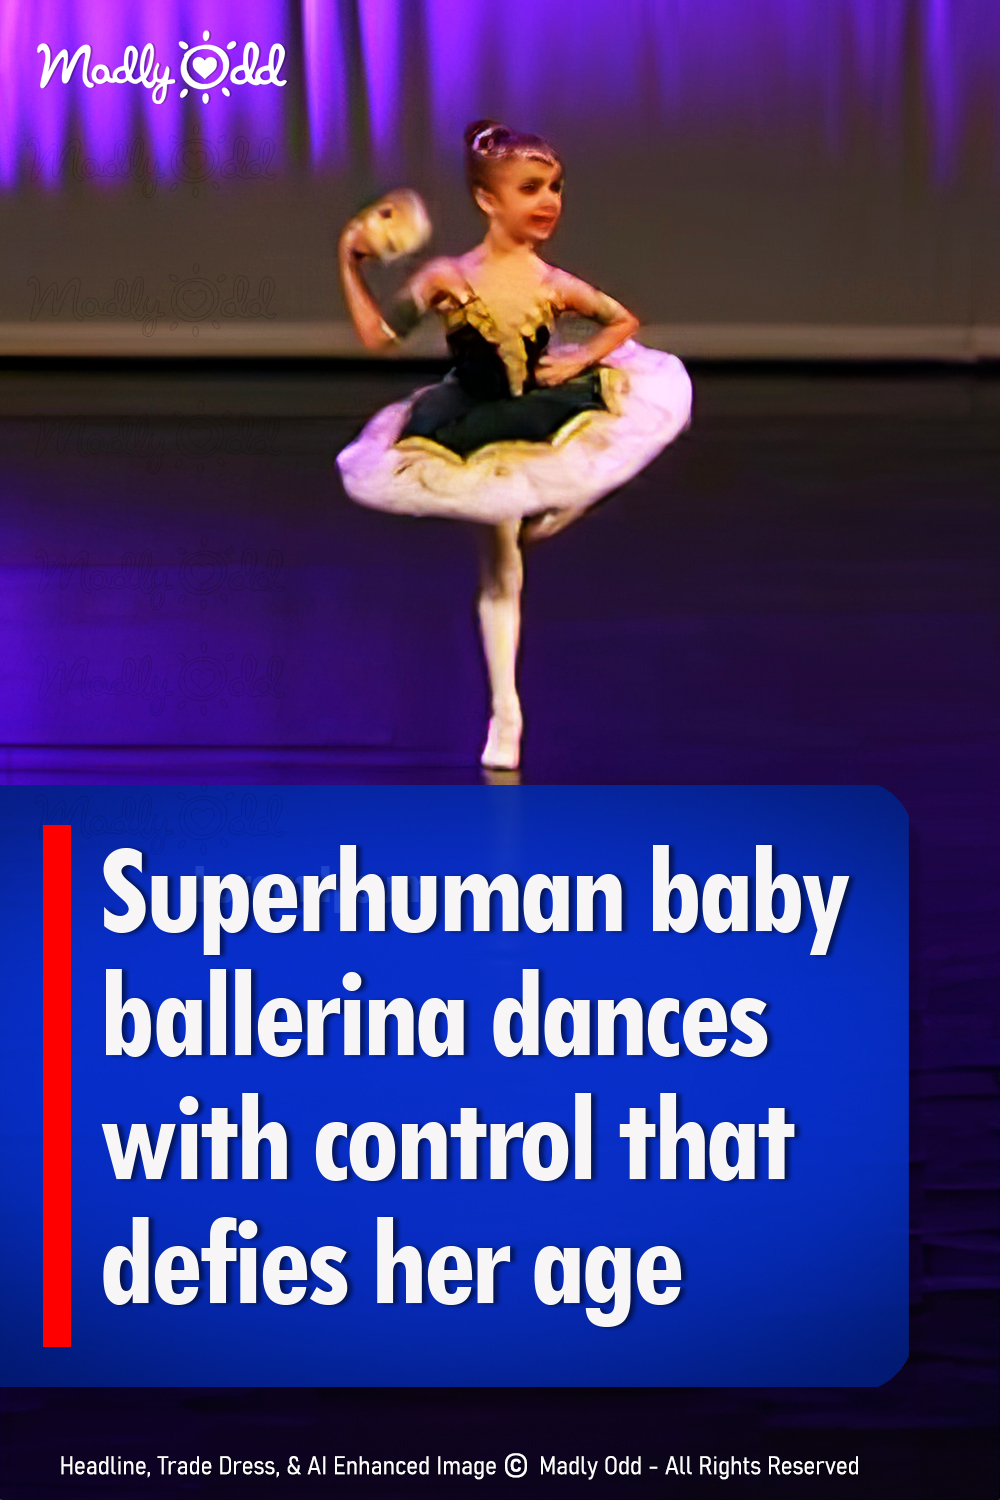 Superhuman baby ballerina dances with control that defies her age